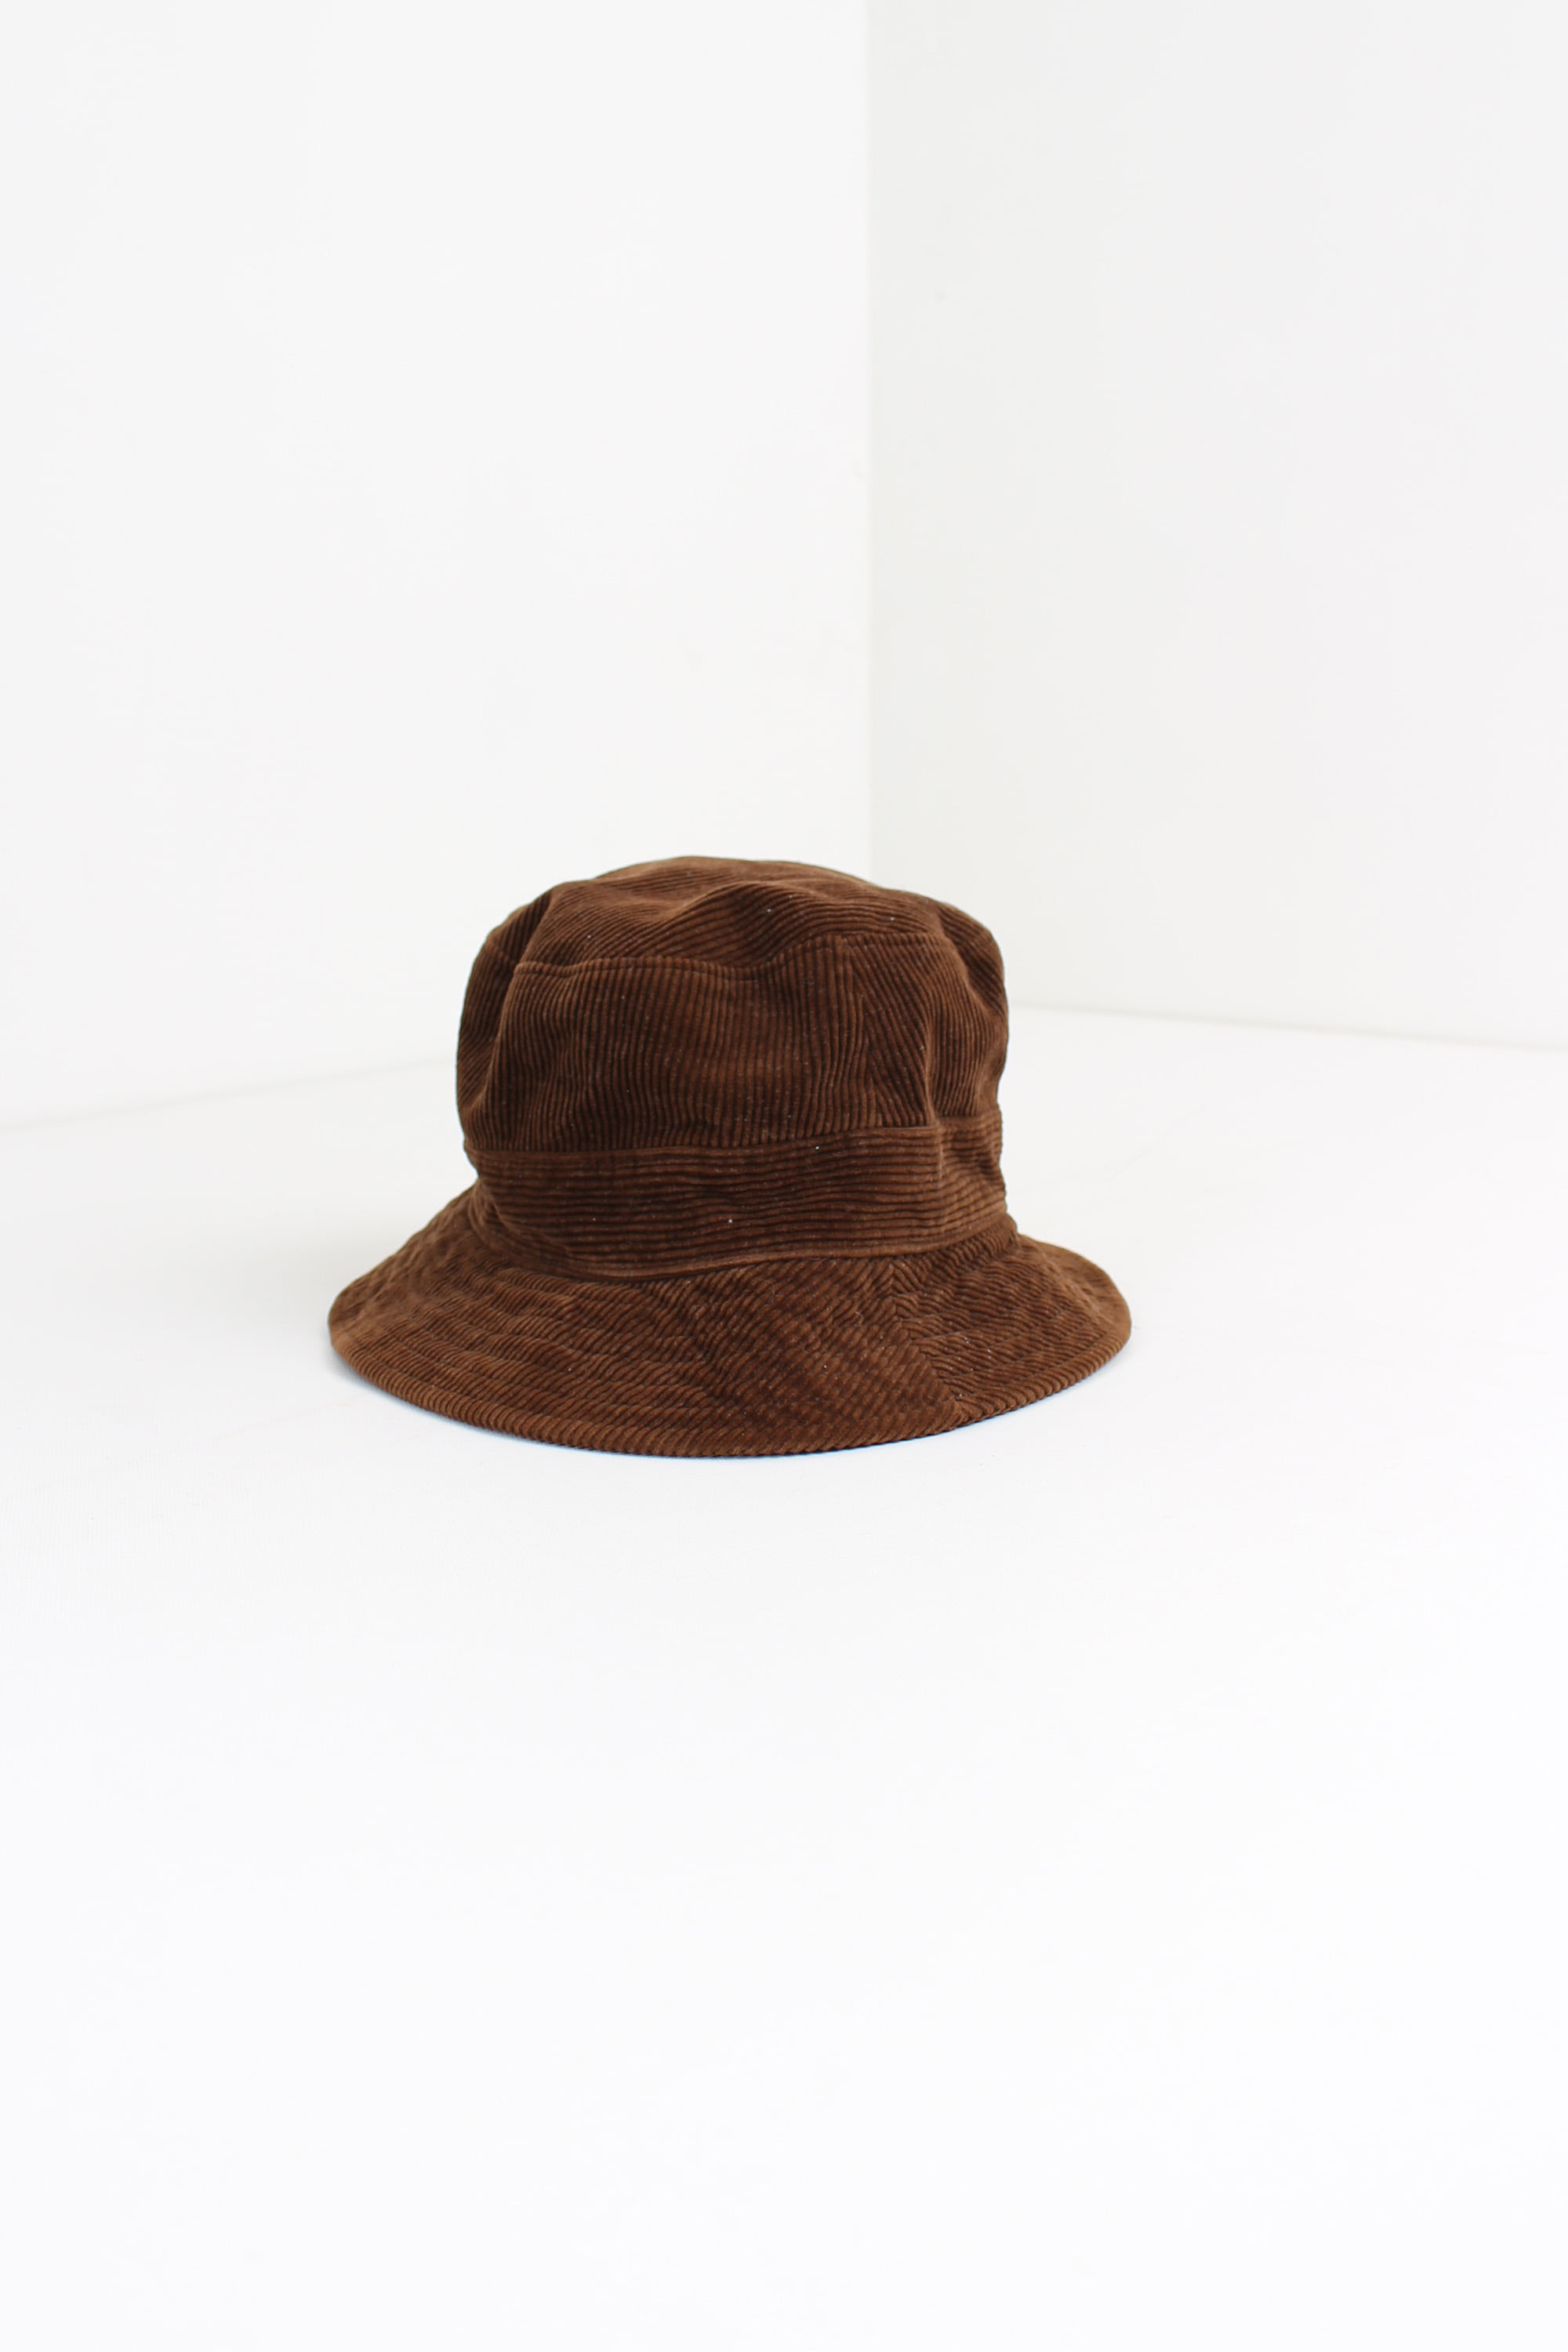 DO! FAMILY LIMITED bucket hat